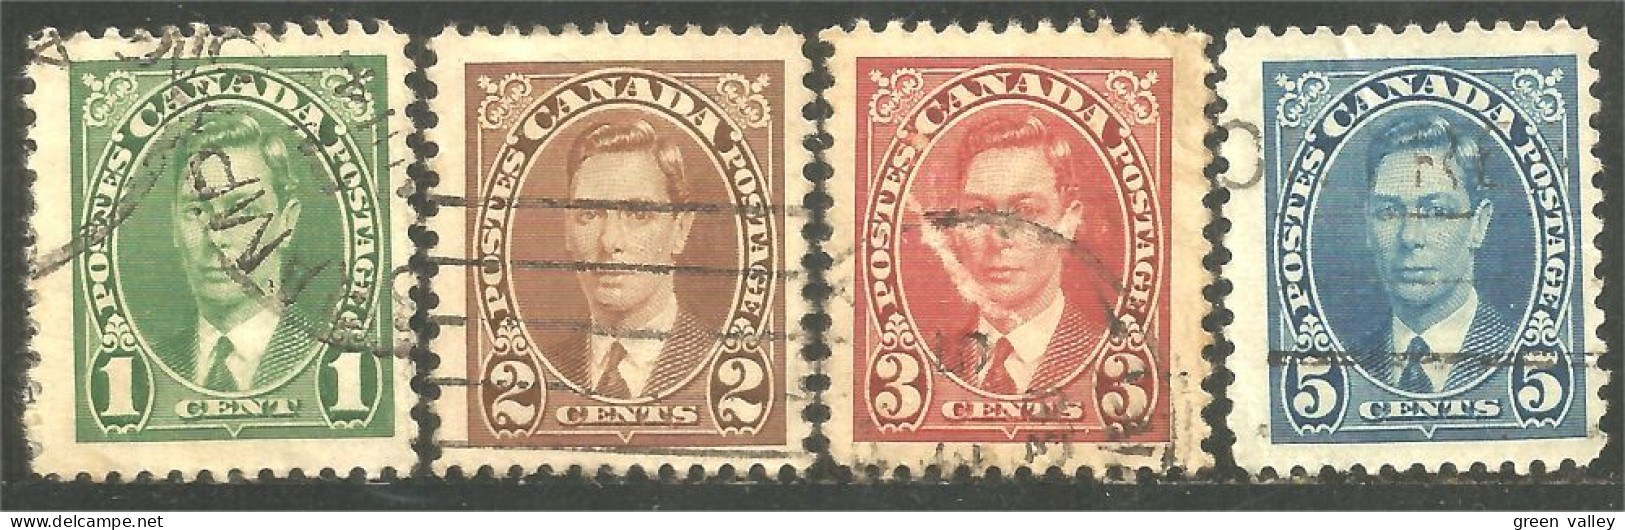 951 Canada 1937 King Roi George VI Mufti Issue 4 Timbres Stamps (484b) - Oblitérés